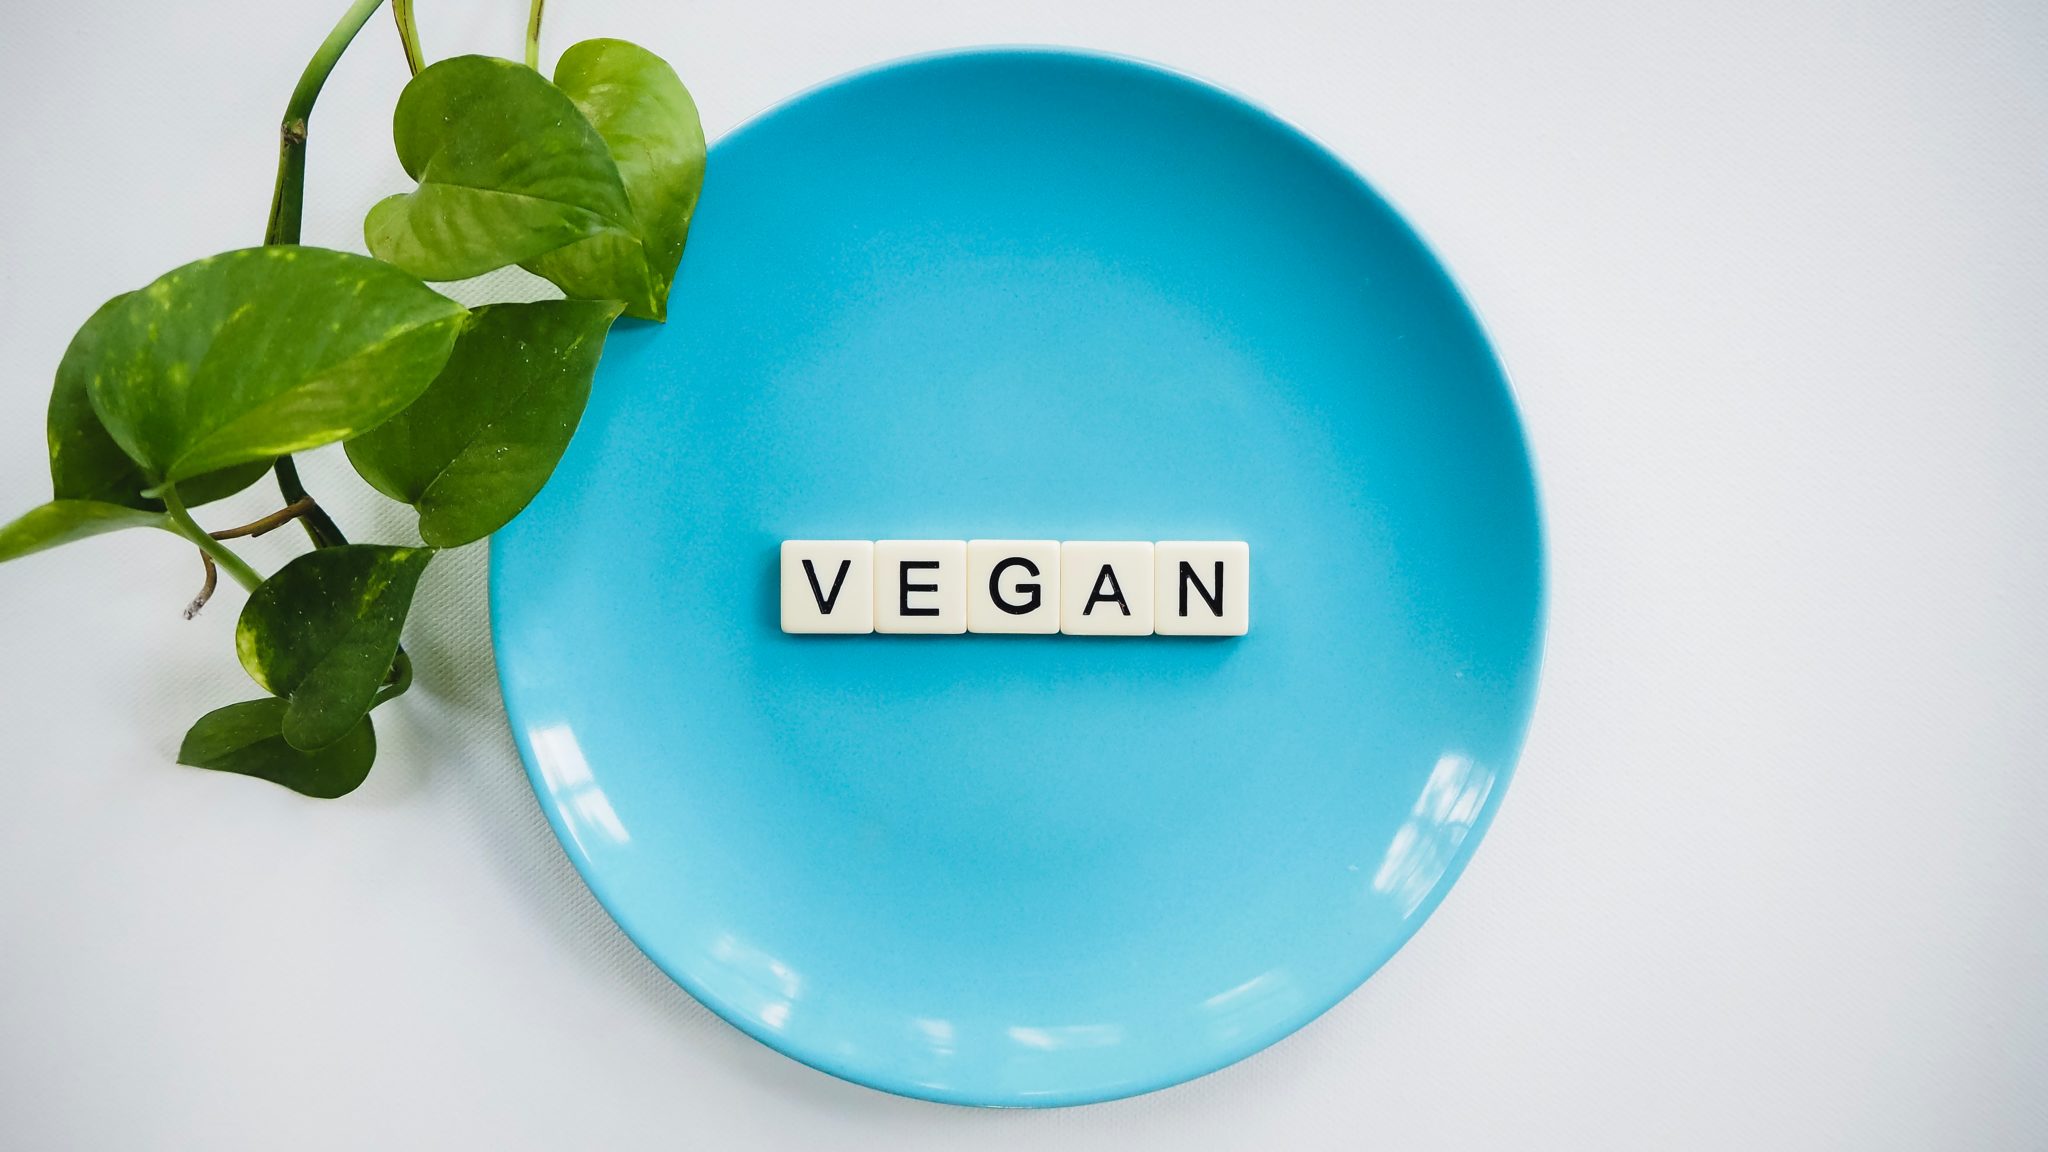 image of a blue plate with tiles on top that read "vegan" against a white background